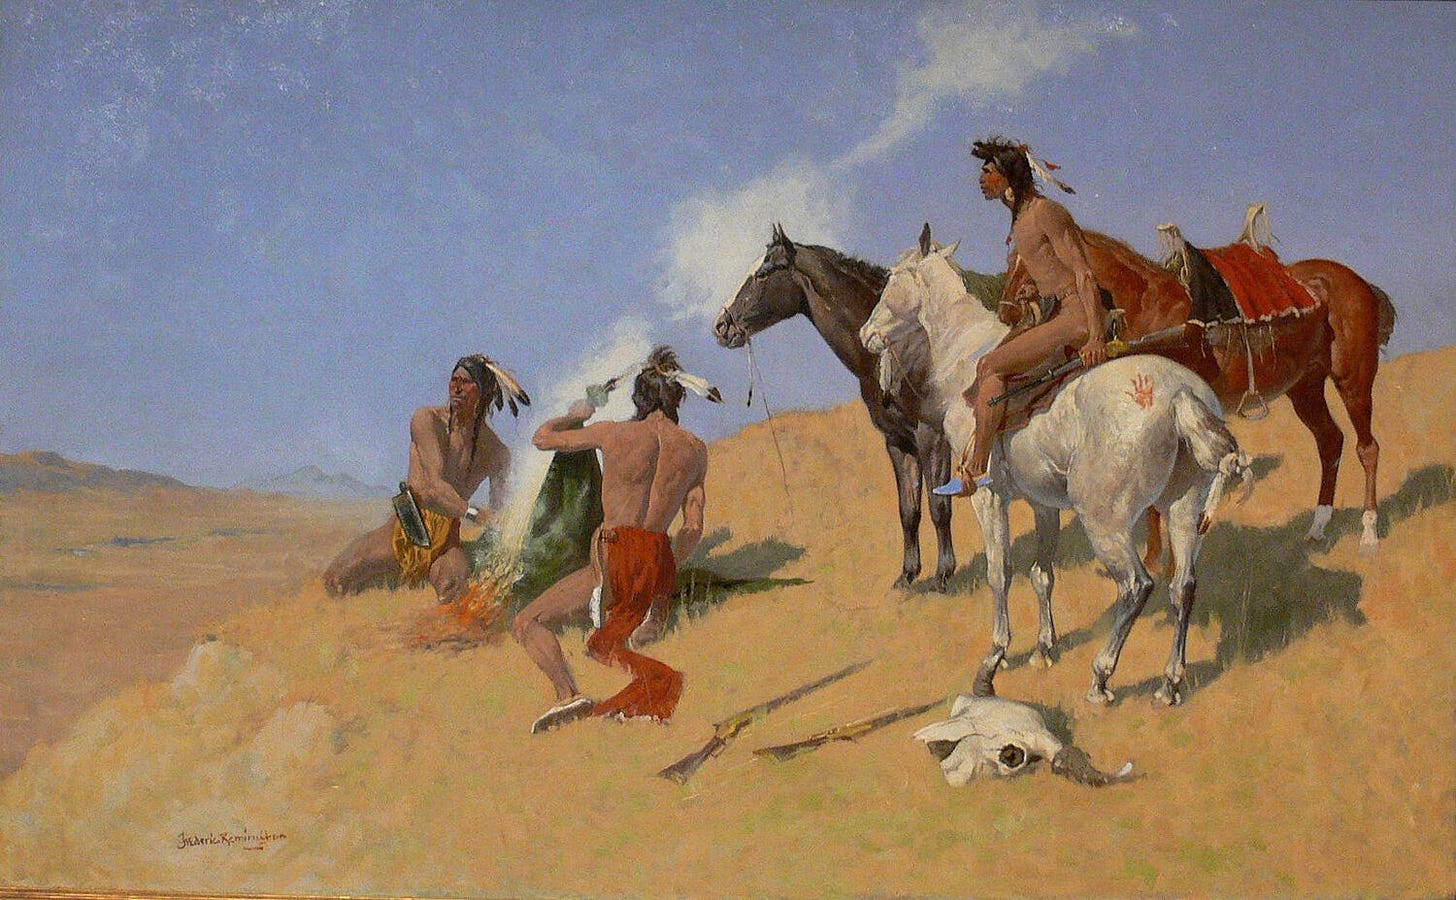 Painting by Frederic Remington showing native americans generating a smoke signal; Amon Carter Museum, Fort Worth